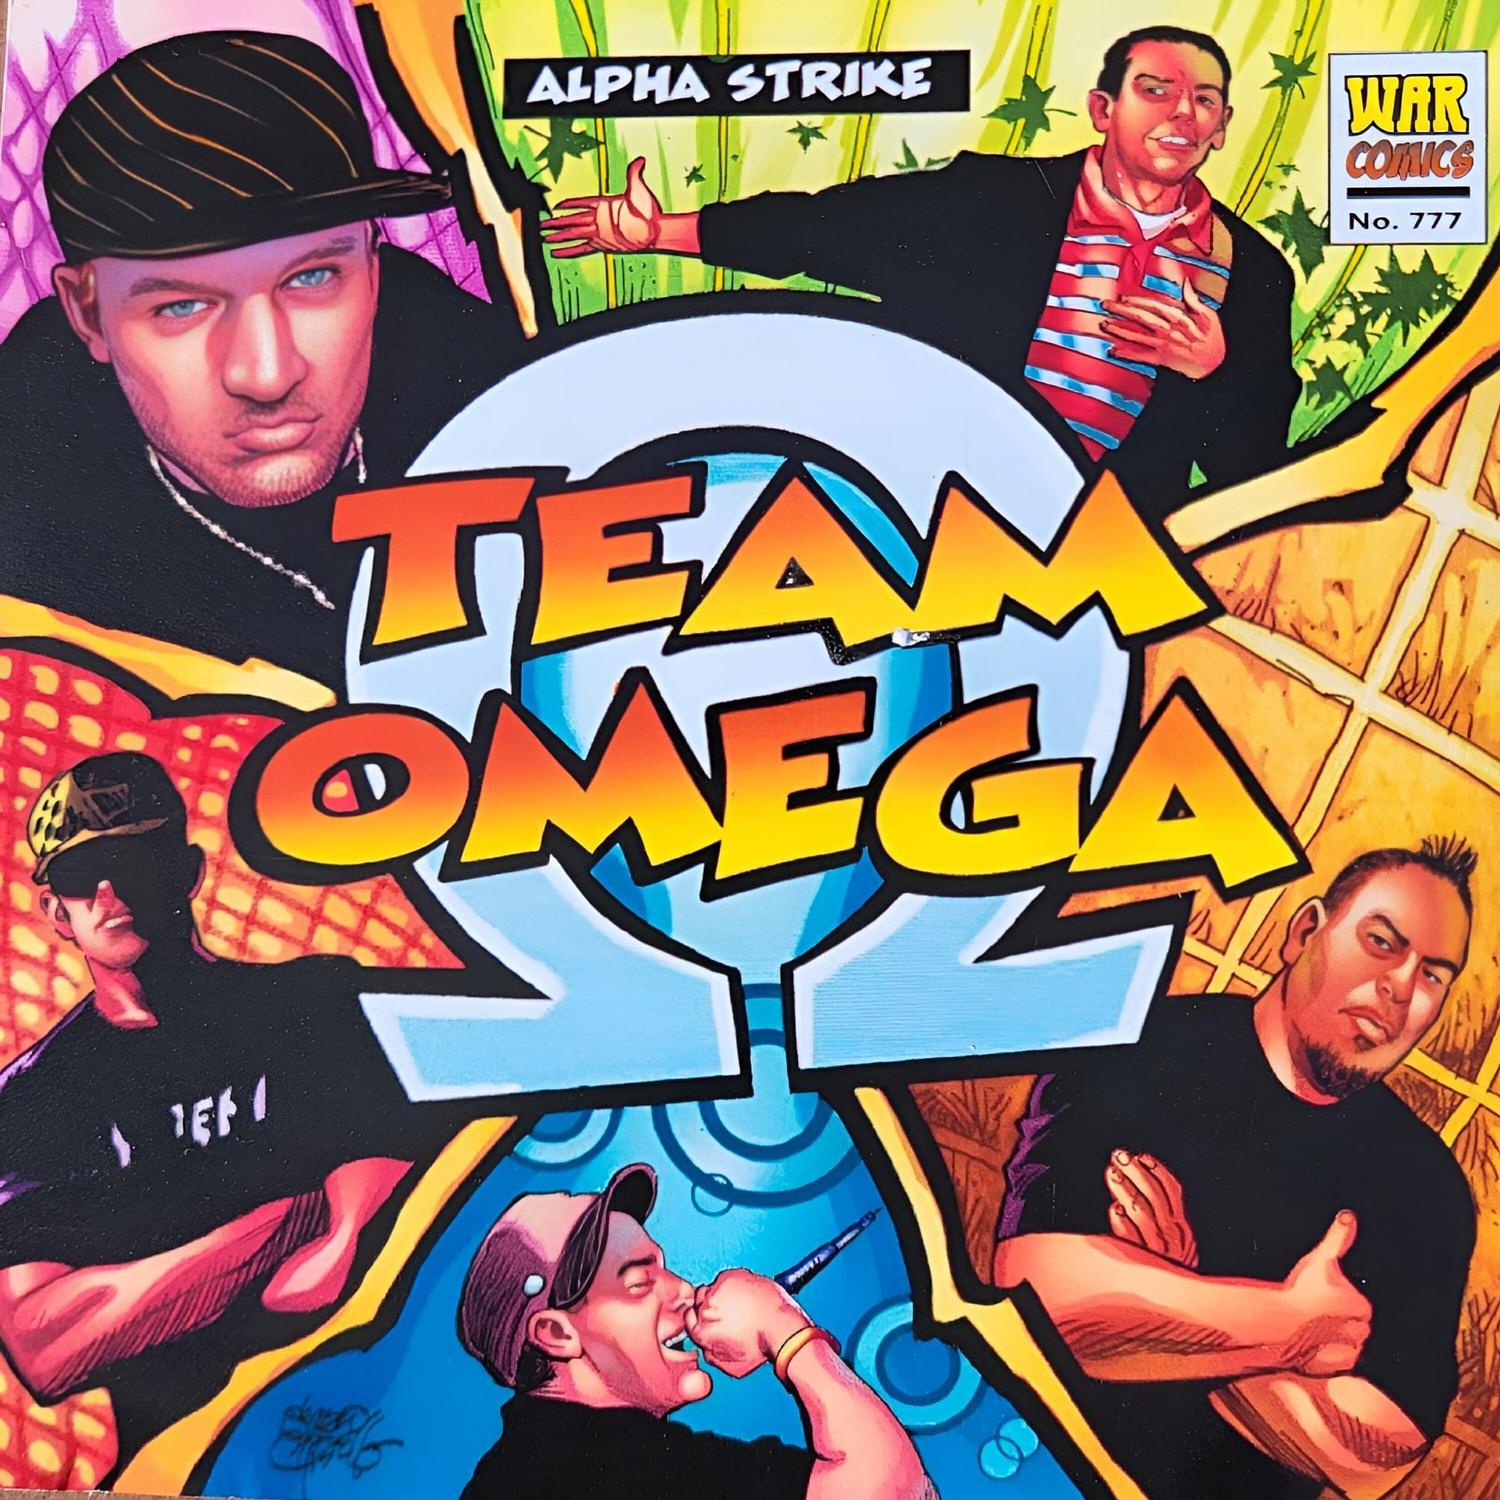 Team Omega - Meanwhile at Shortop's Lair